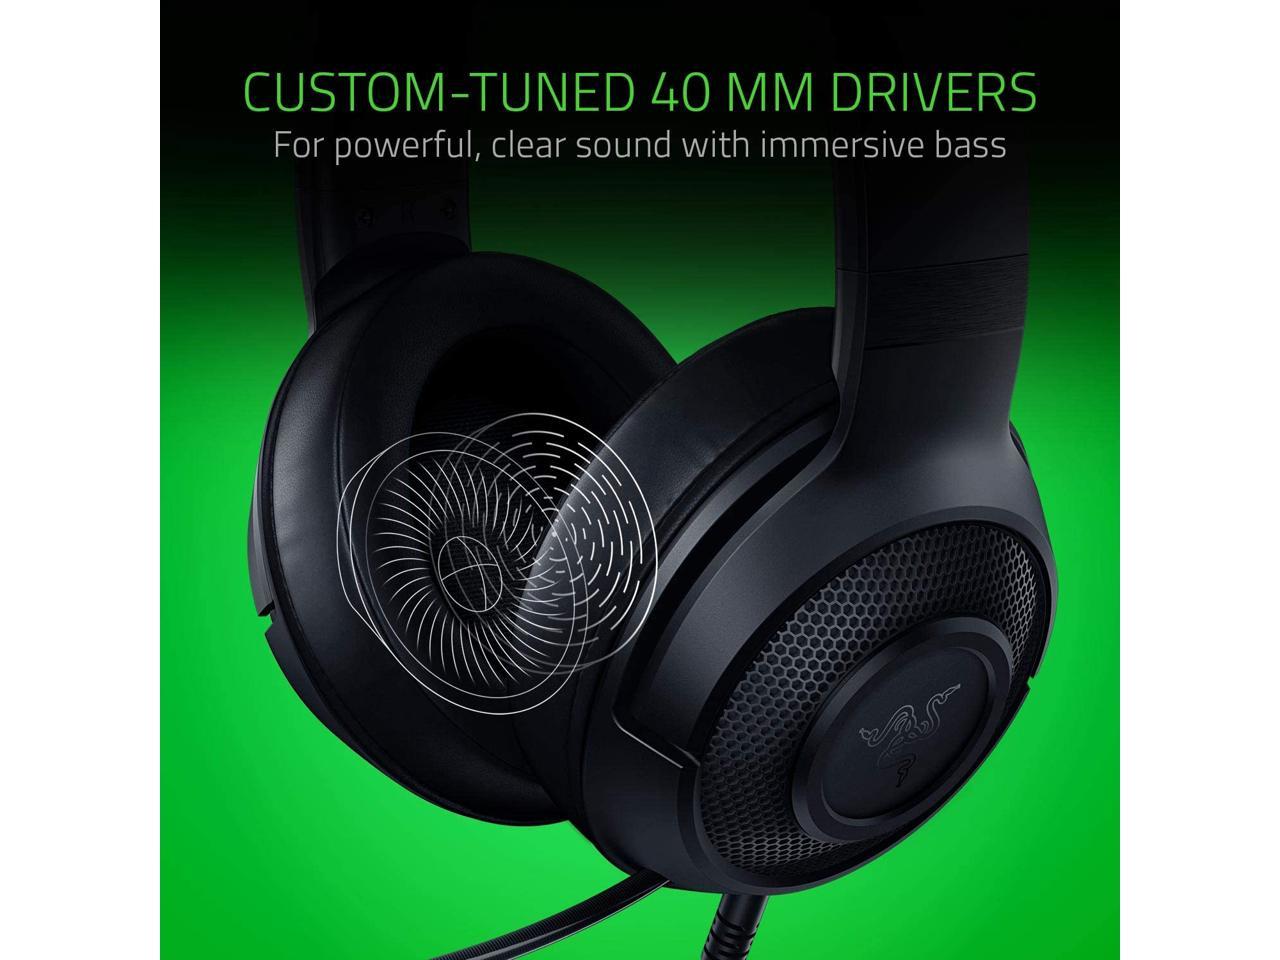 Razer Kraken X Ultralight Gaming Headset 7 1 Surround Sound Capable Lightweight Frame Integrated Audio Controls Bendable Cardioid Microphone For Pc Xbox Ps4 Nintendo Switch Classic Black Newegg Com